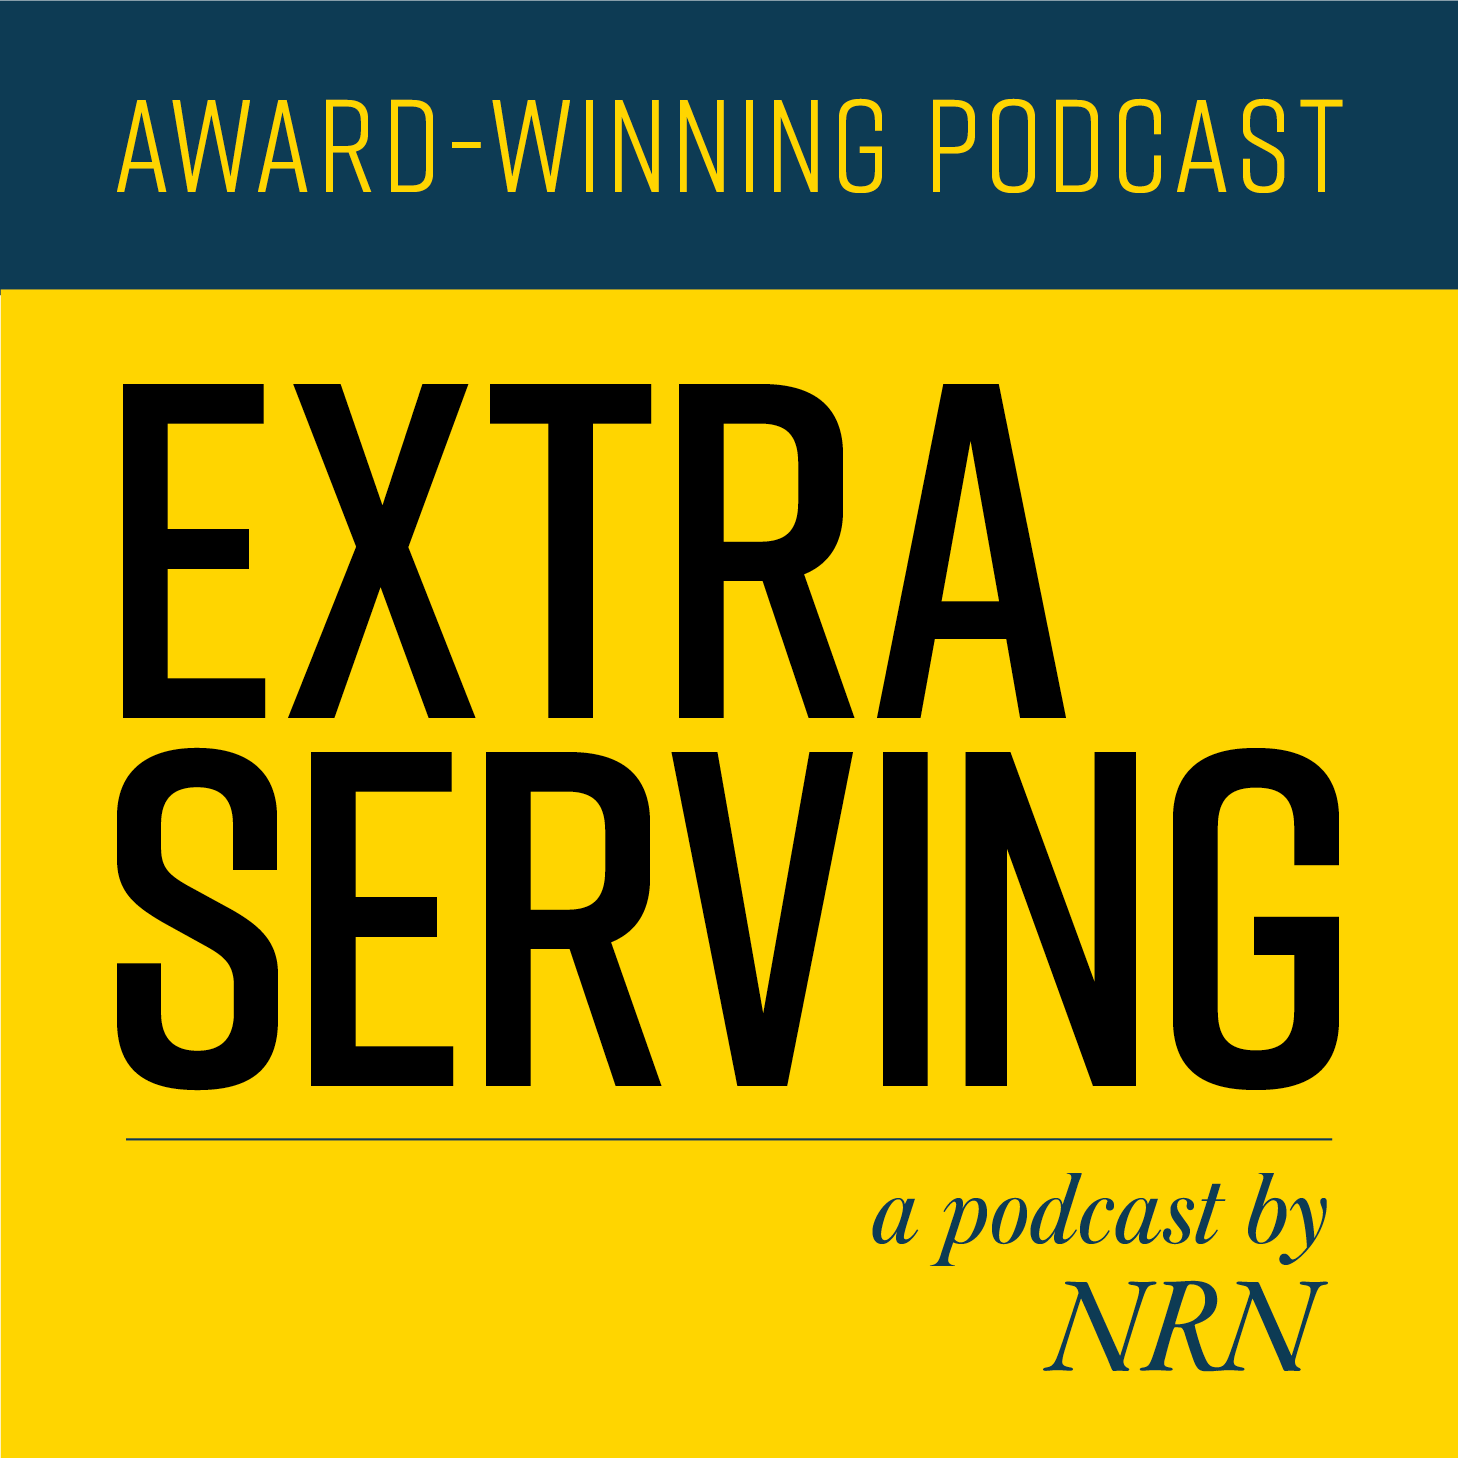 NRN editors discuss the midterm election and the urbanization of restaurants